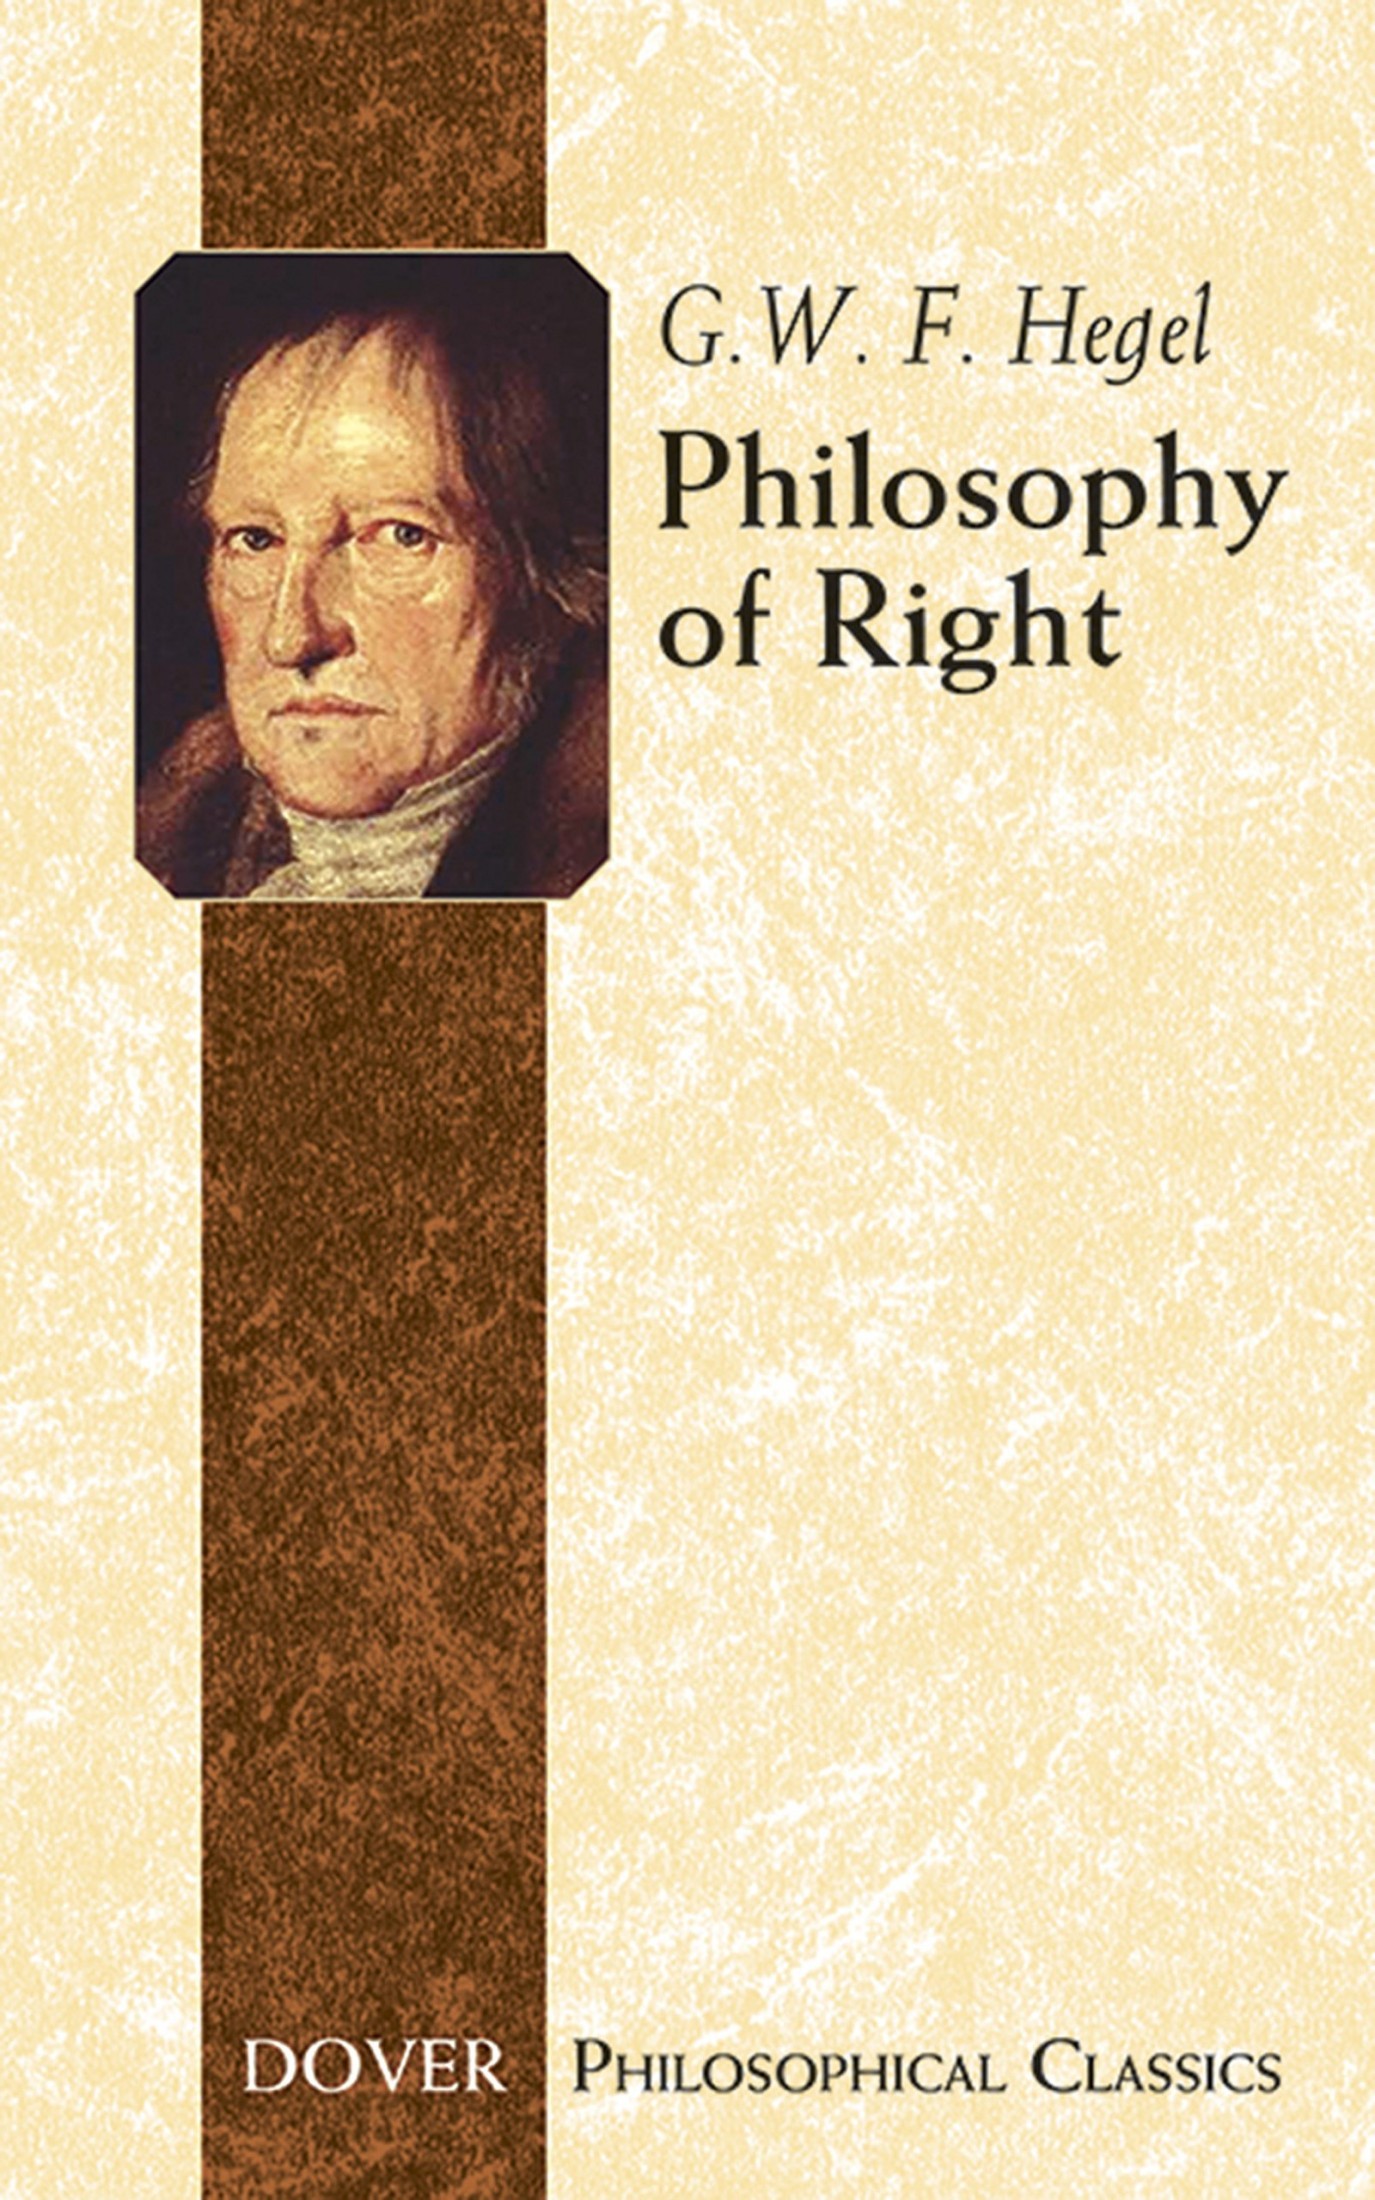 Contents of Hegel's Philosophy of Right